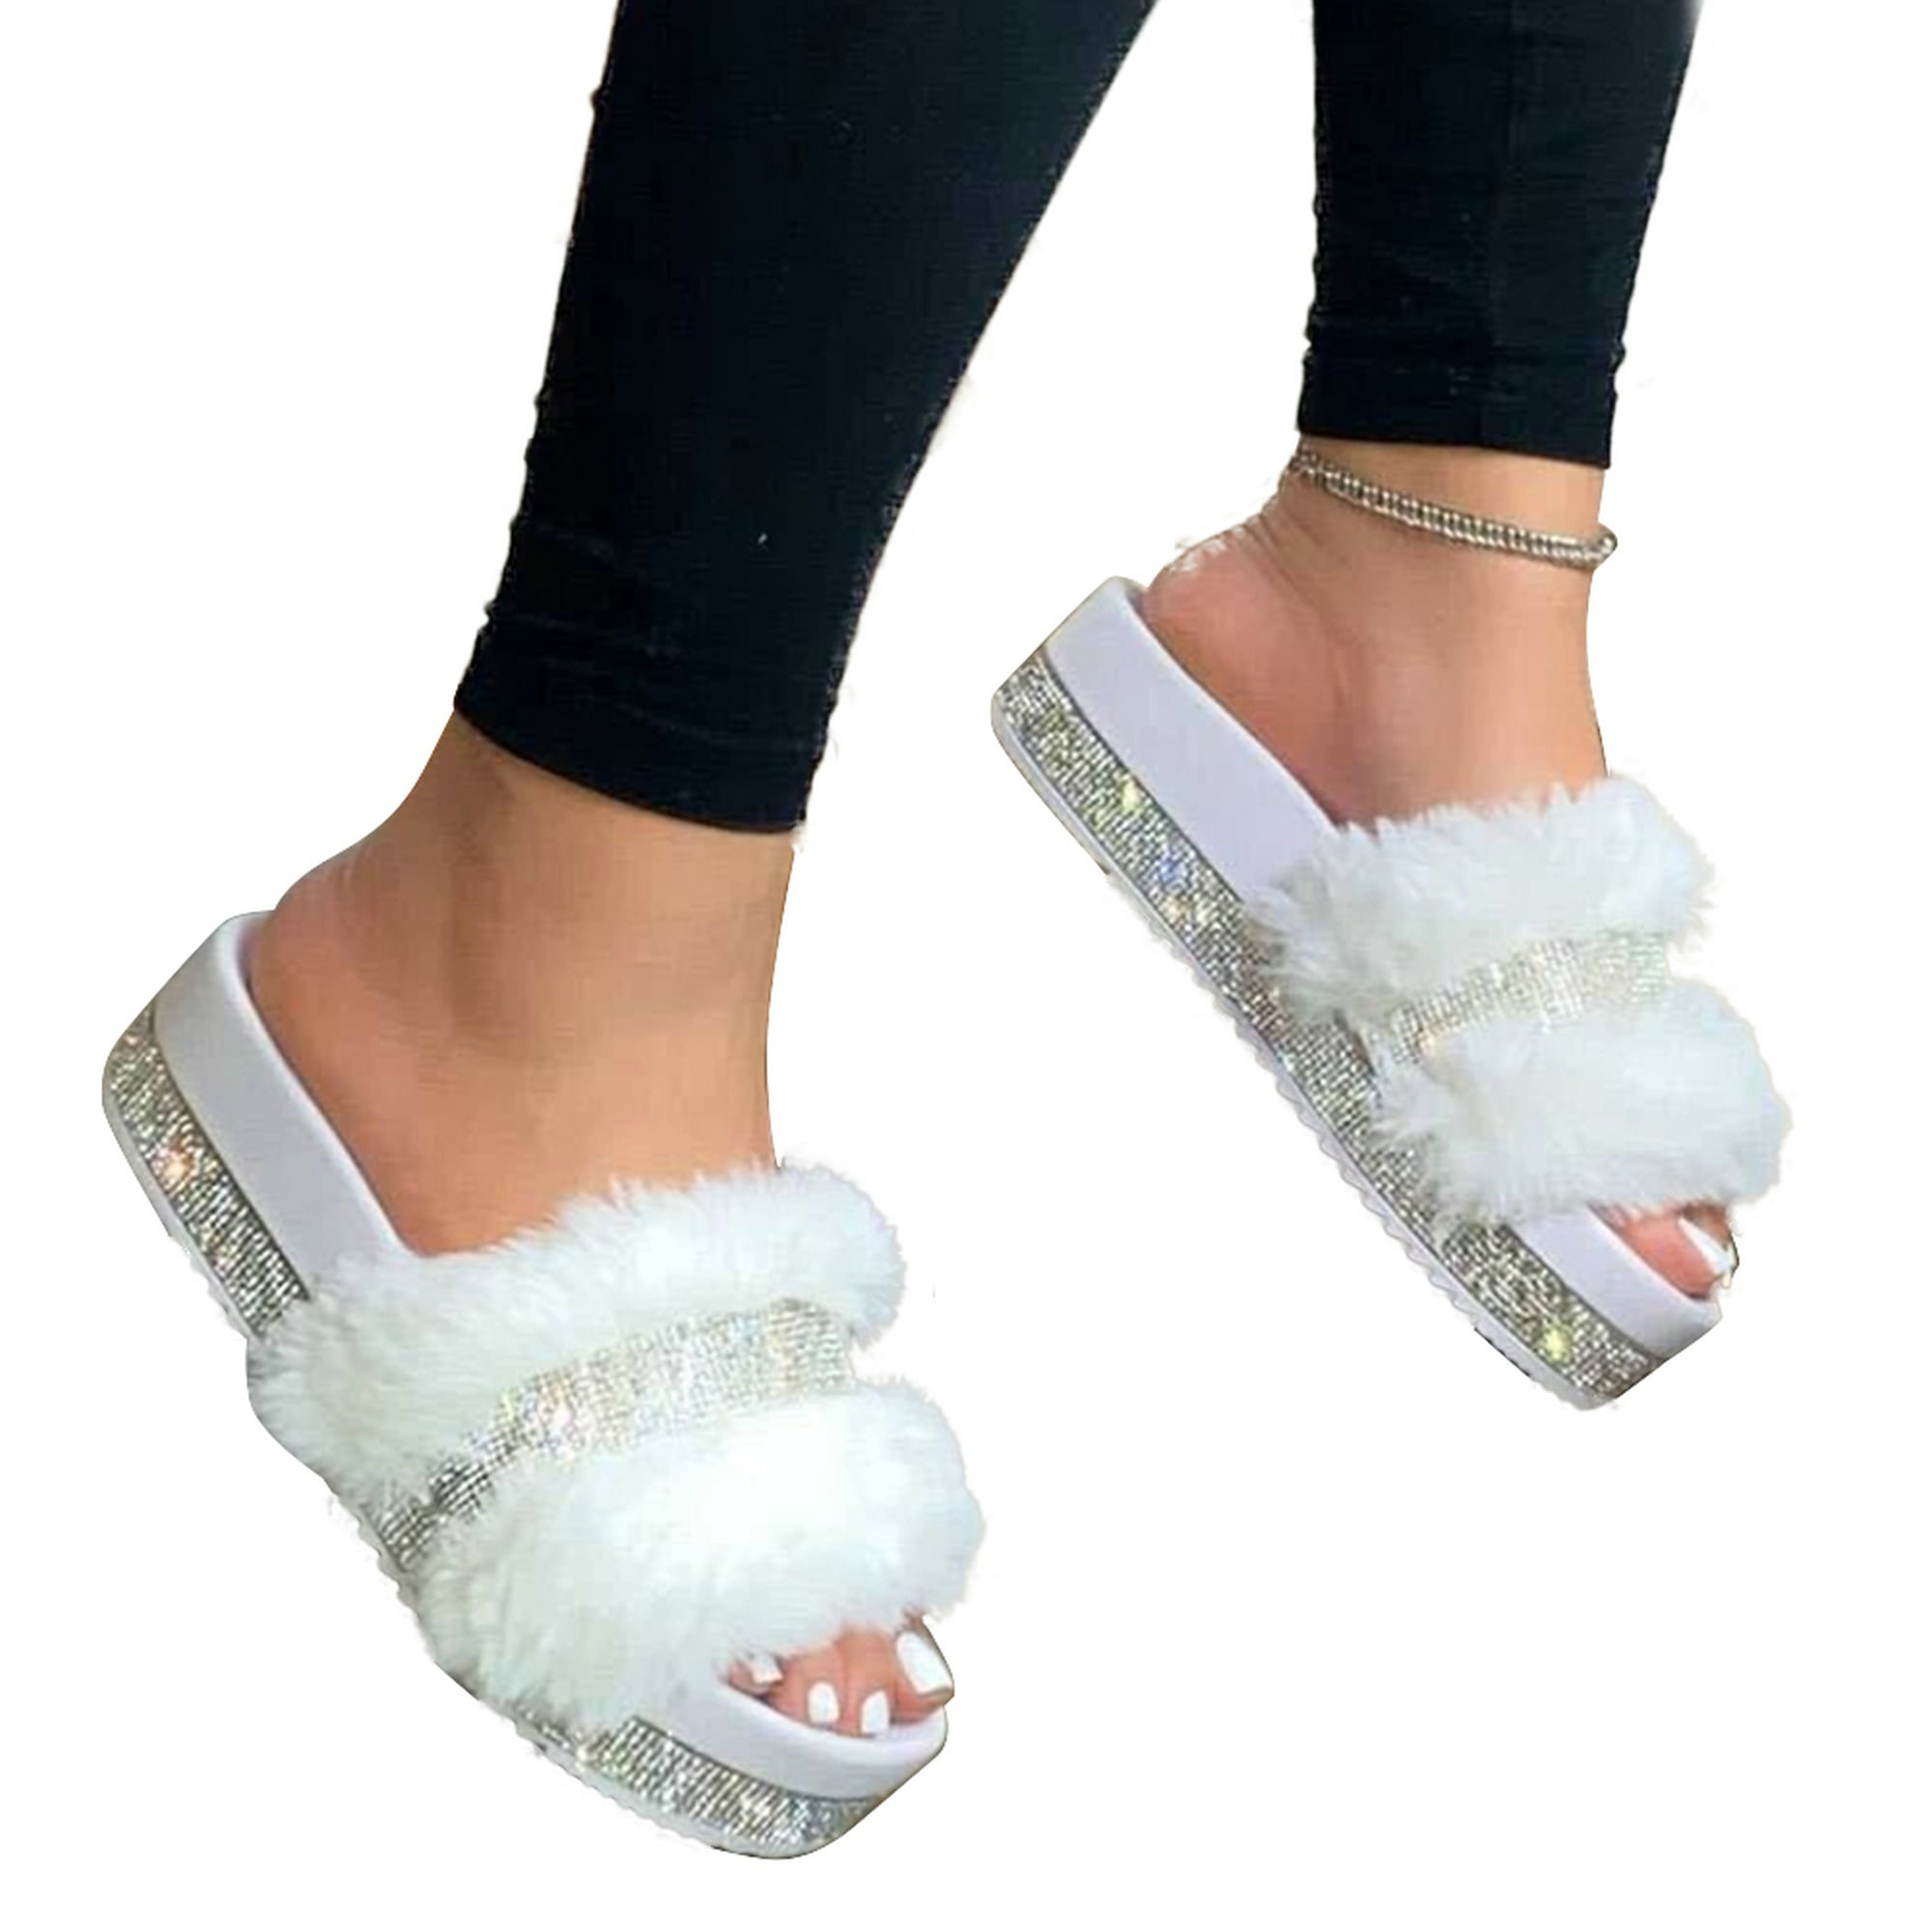 Hot New Womens Platform Slippers Shoes Wedge Heel Sequins Bling Sandals Sizes 